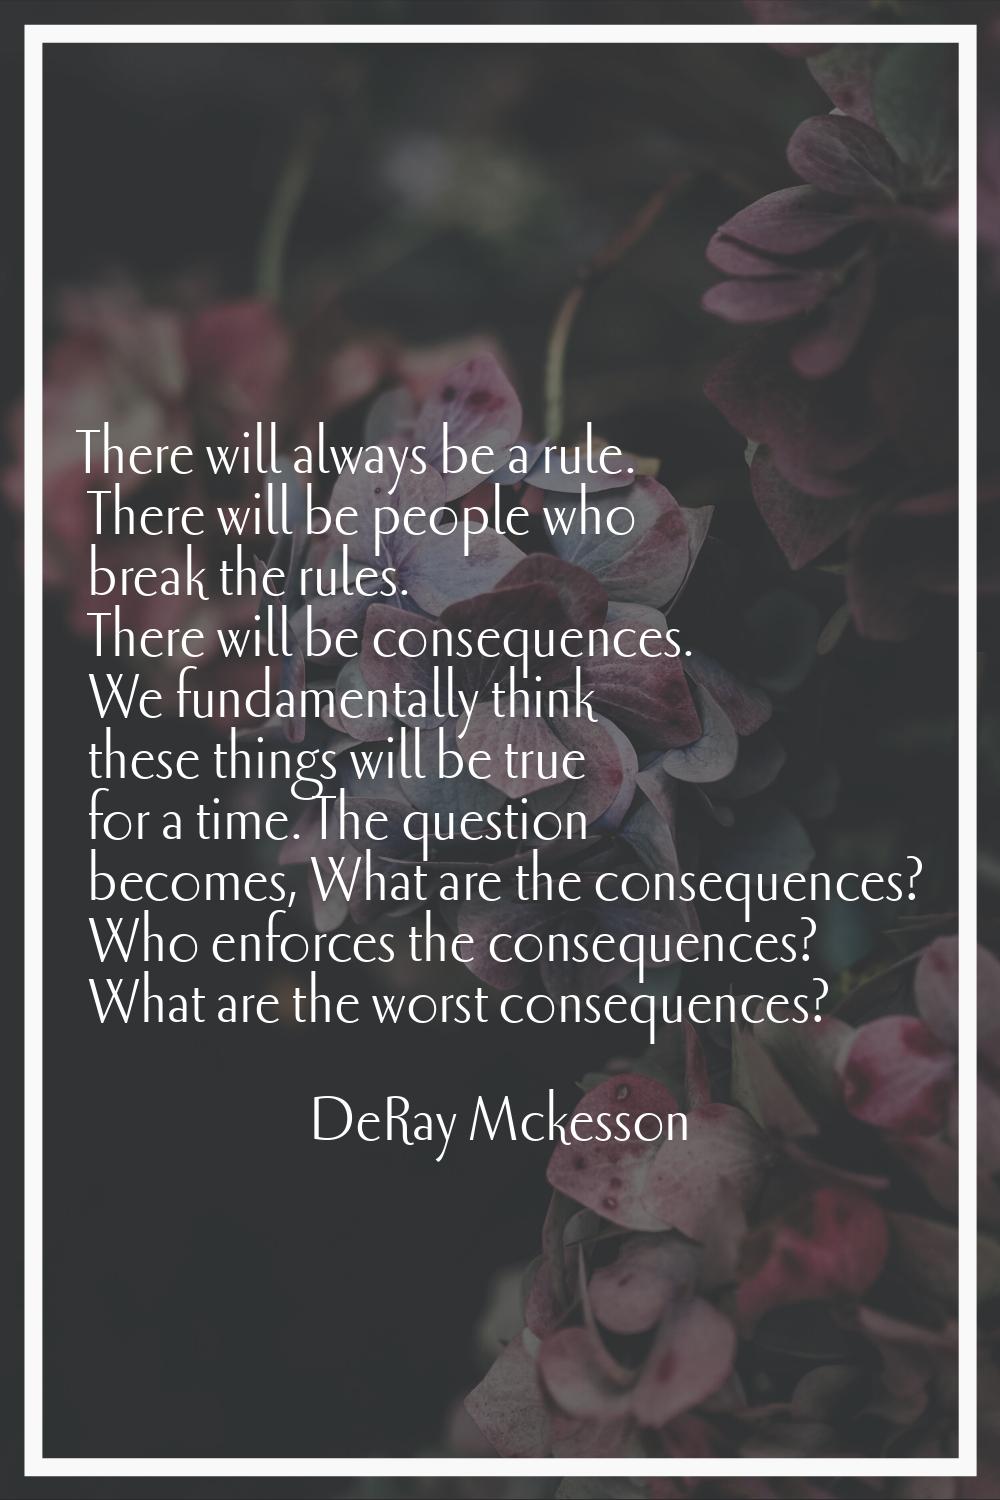 There will always be a rule. There will be people who break the rules. There will be consequences. 